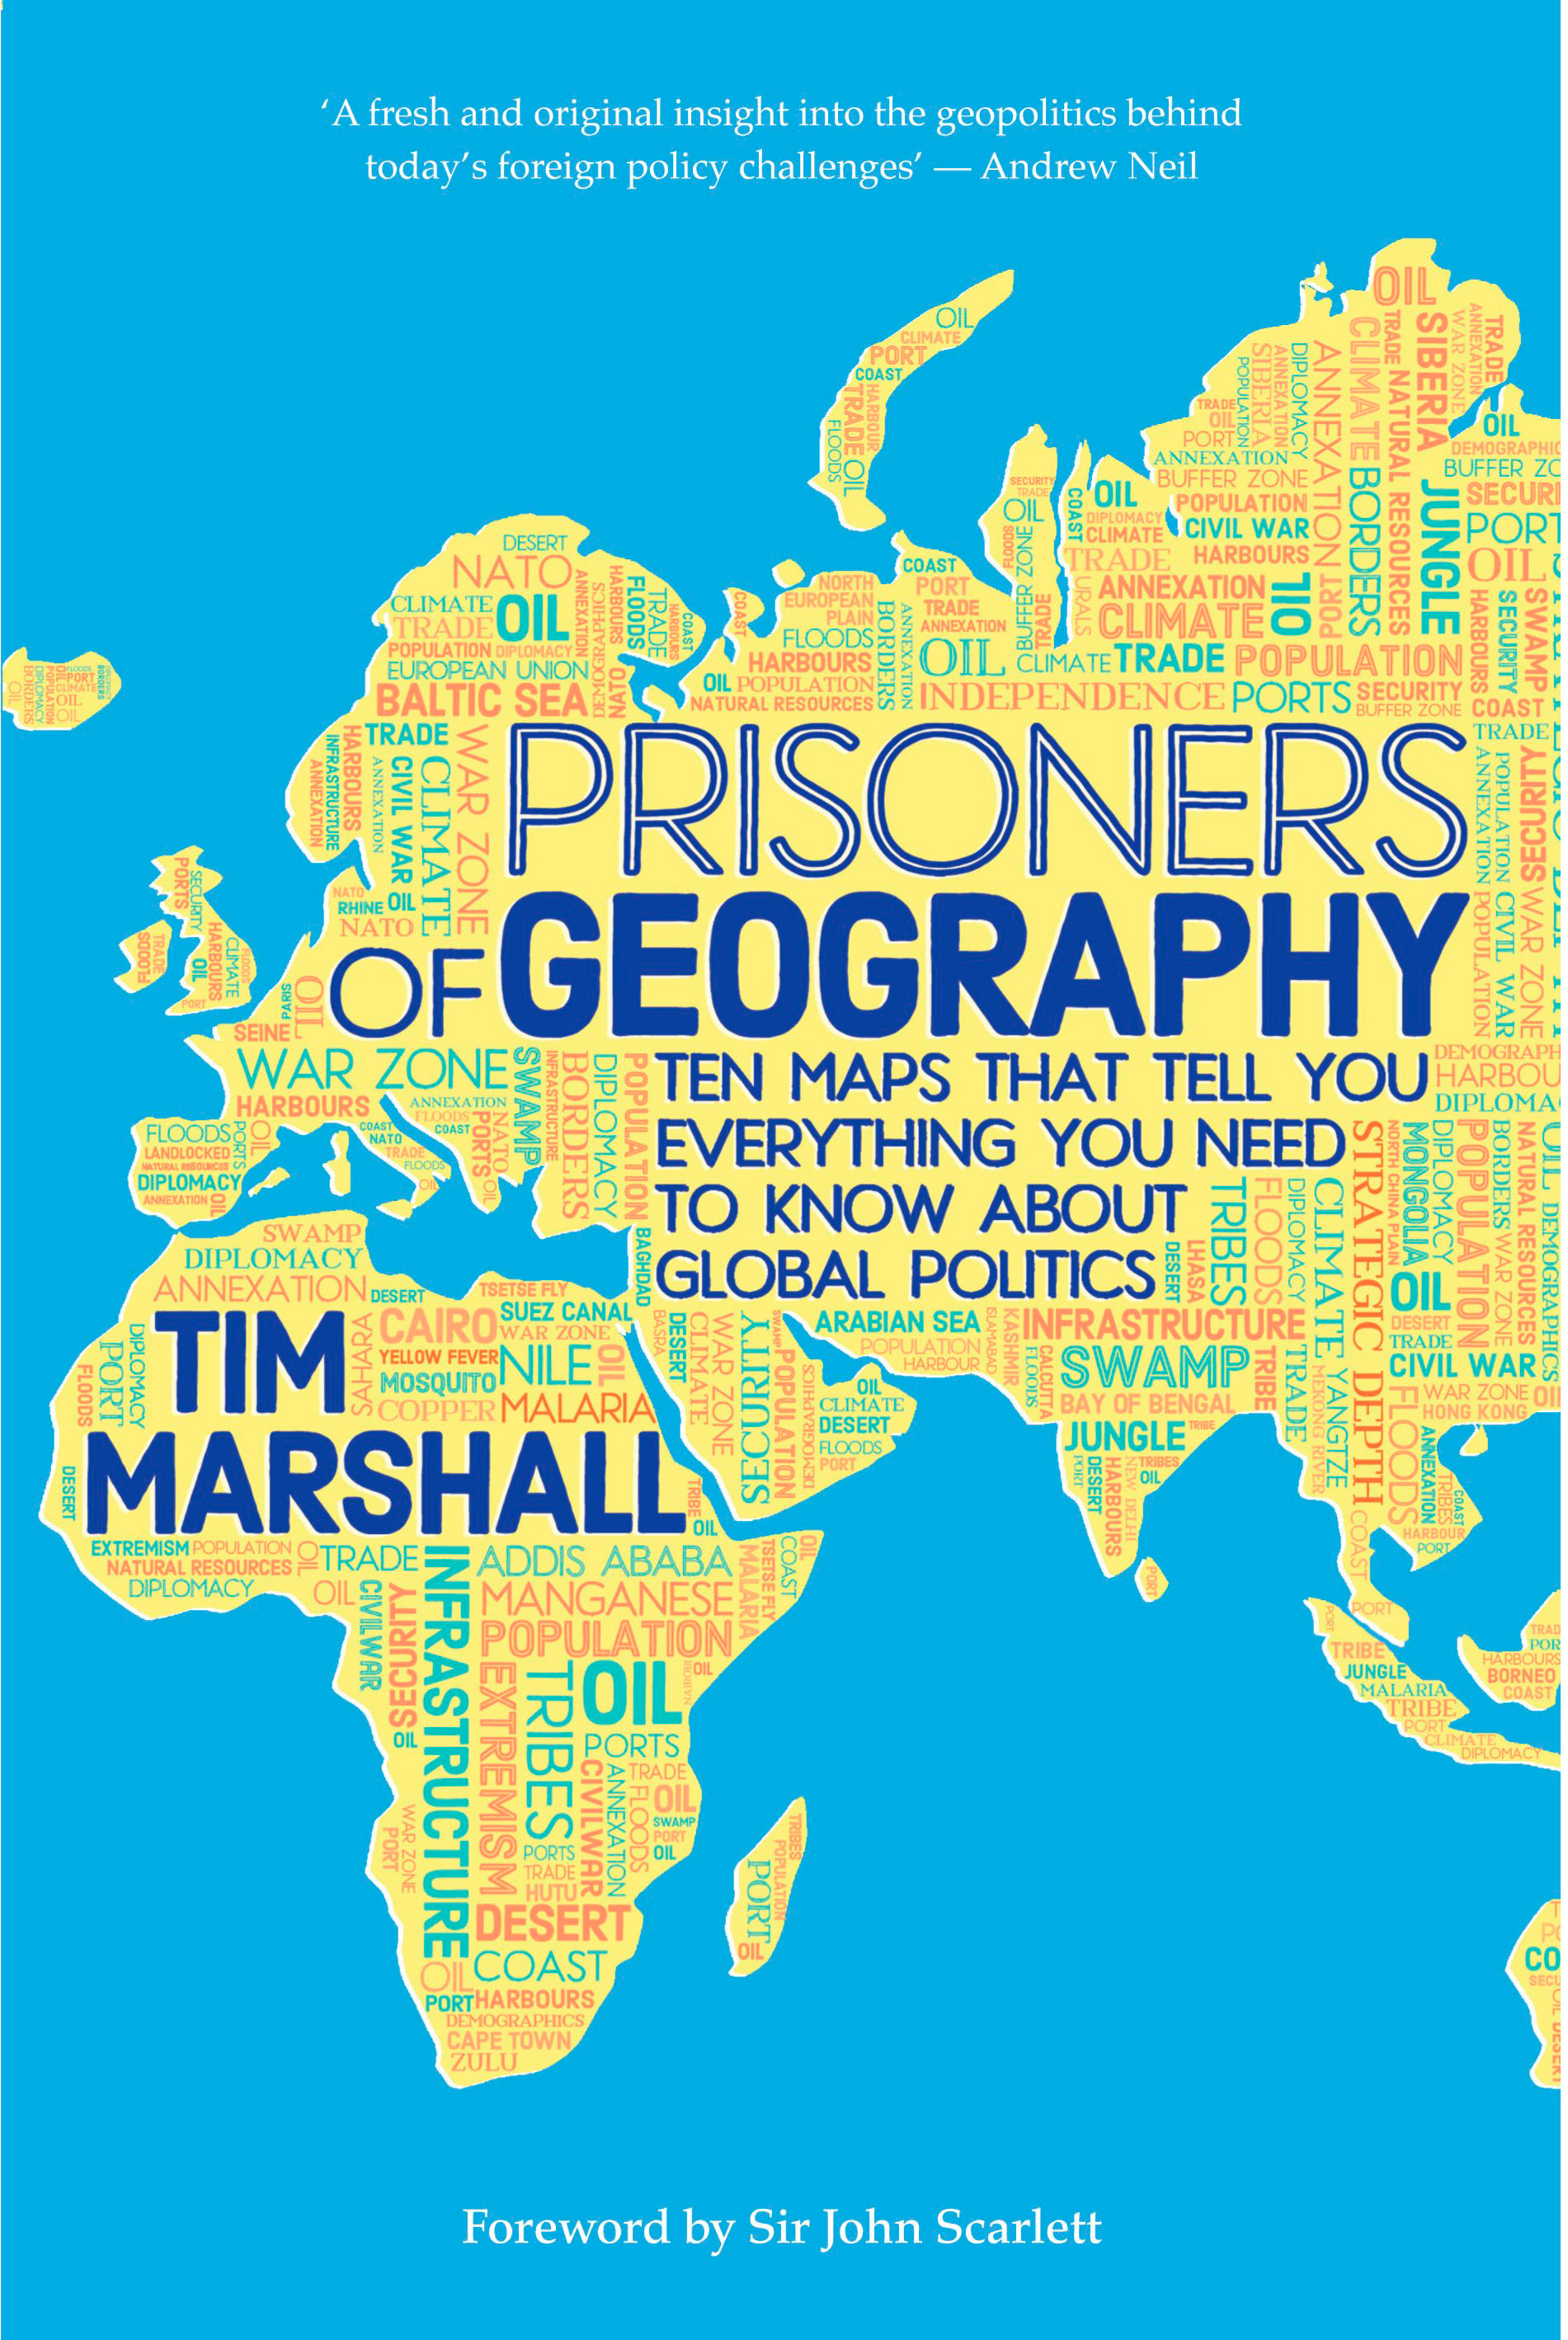 Prisoners of Geography: Ten Maps that tell you everything you need to know about Global Politics